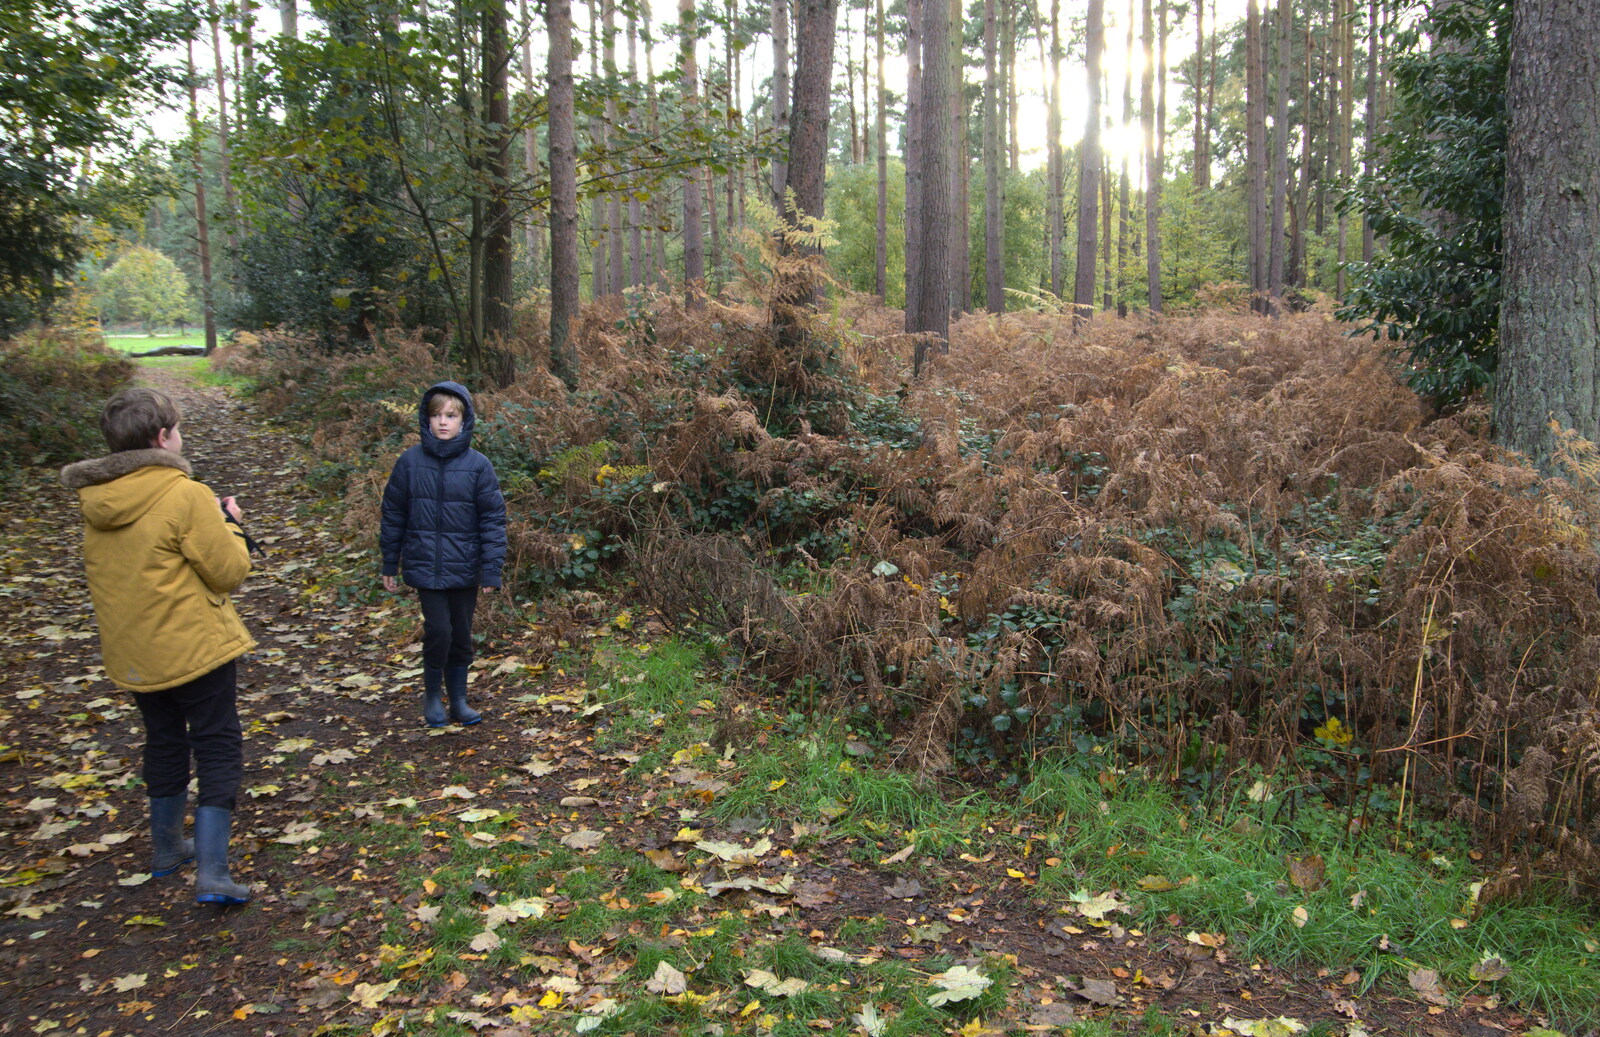 The boys in the forest from A Trip to Sandringham Estate, Norfolk - 31st October 2020